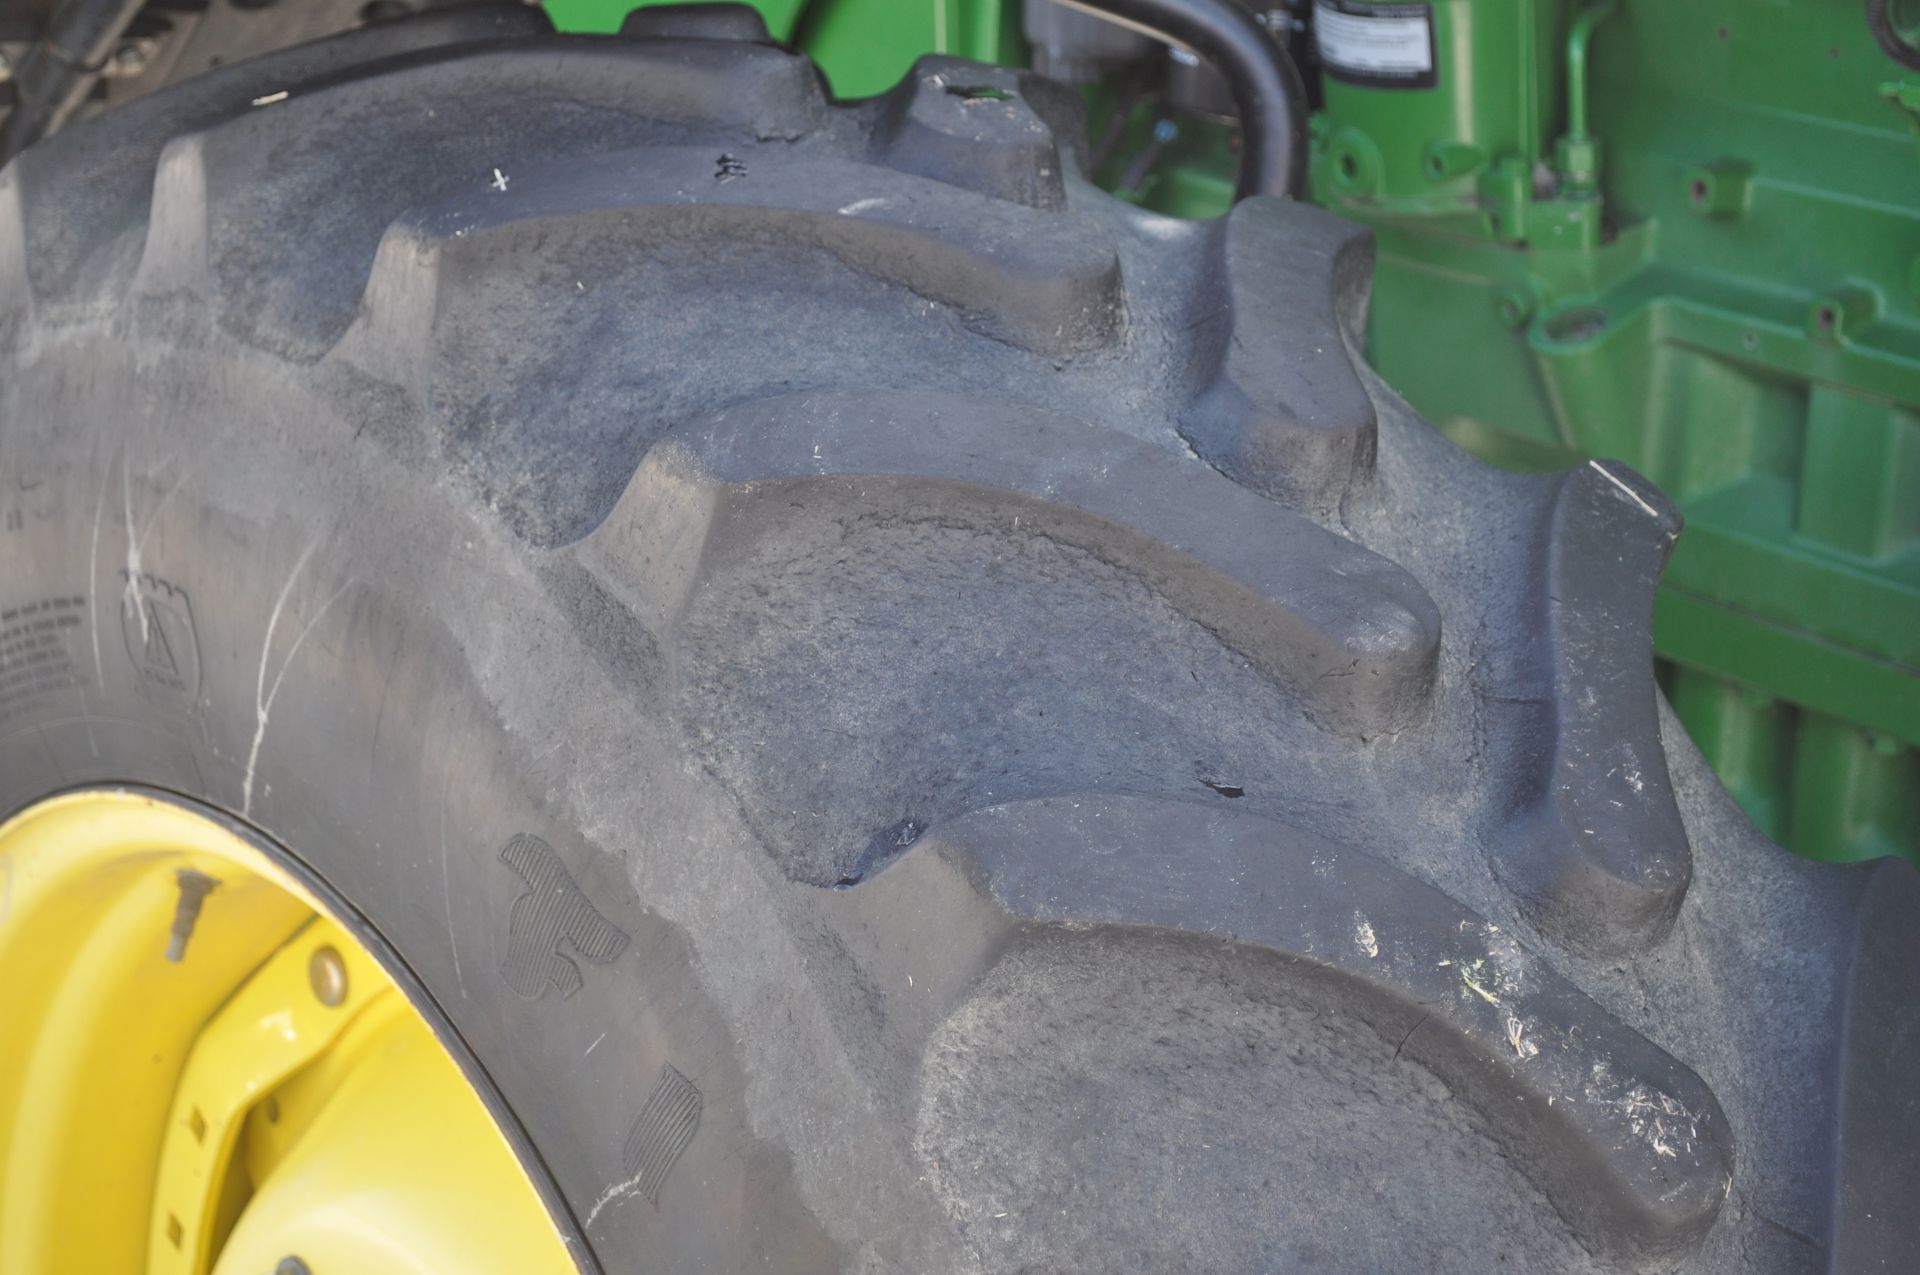 John Deere 8430 tractor, MFWD, 480/80R50 duals, 420/85R34 front, power shift, front fenders, front - Image 10 of 37